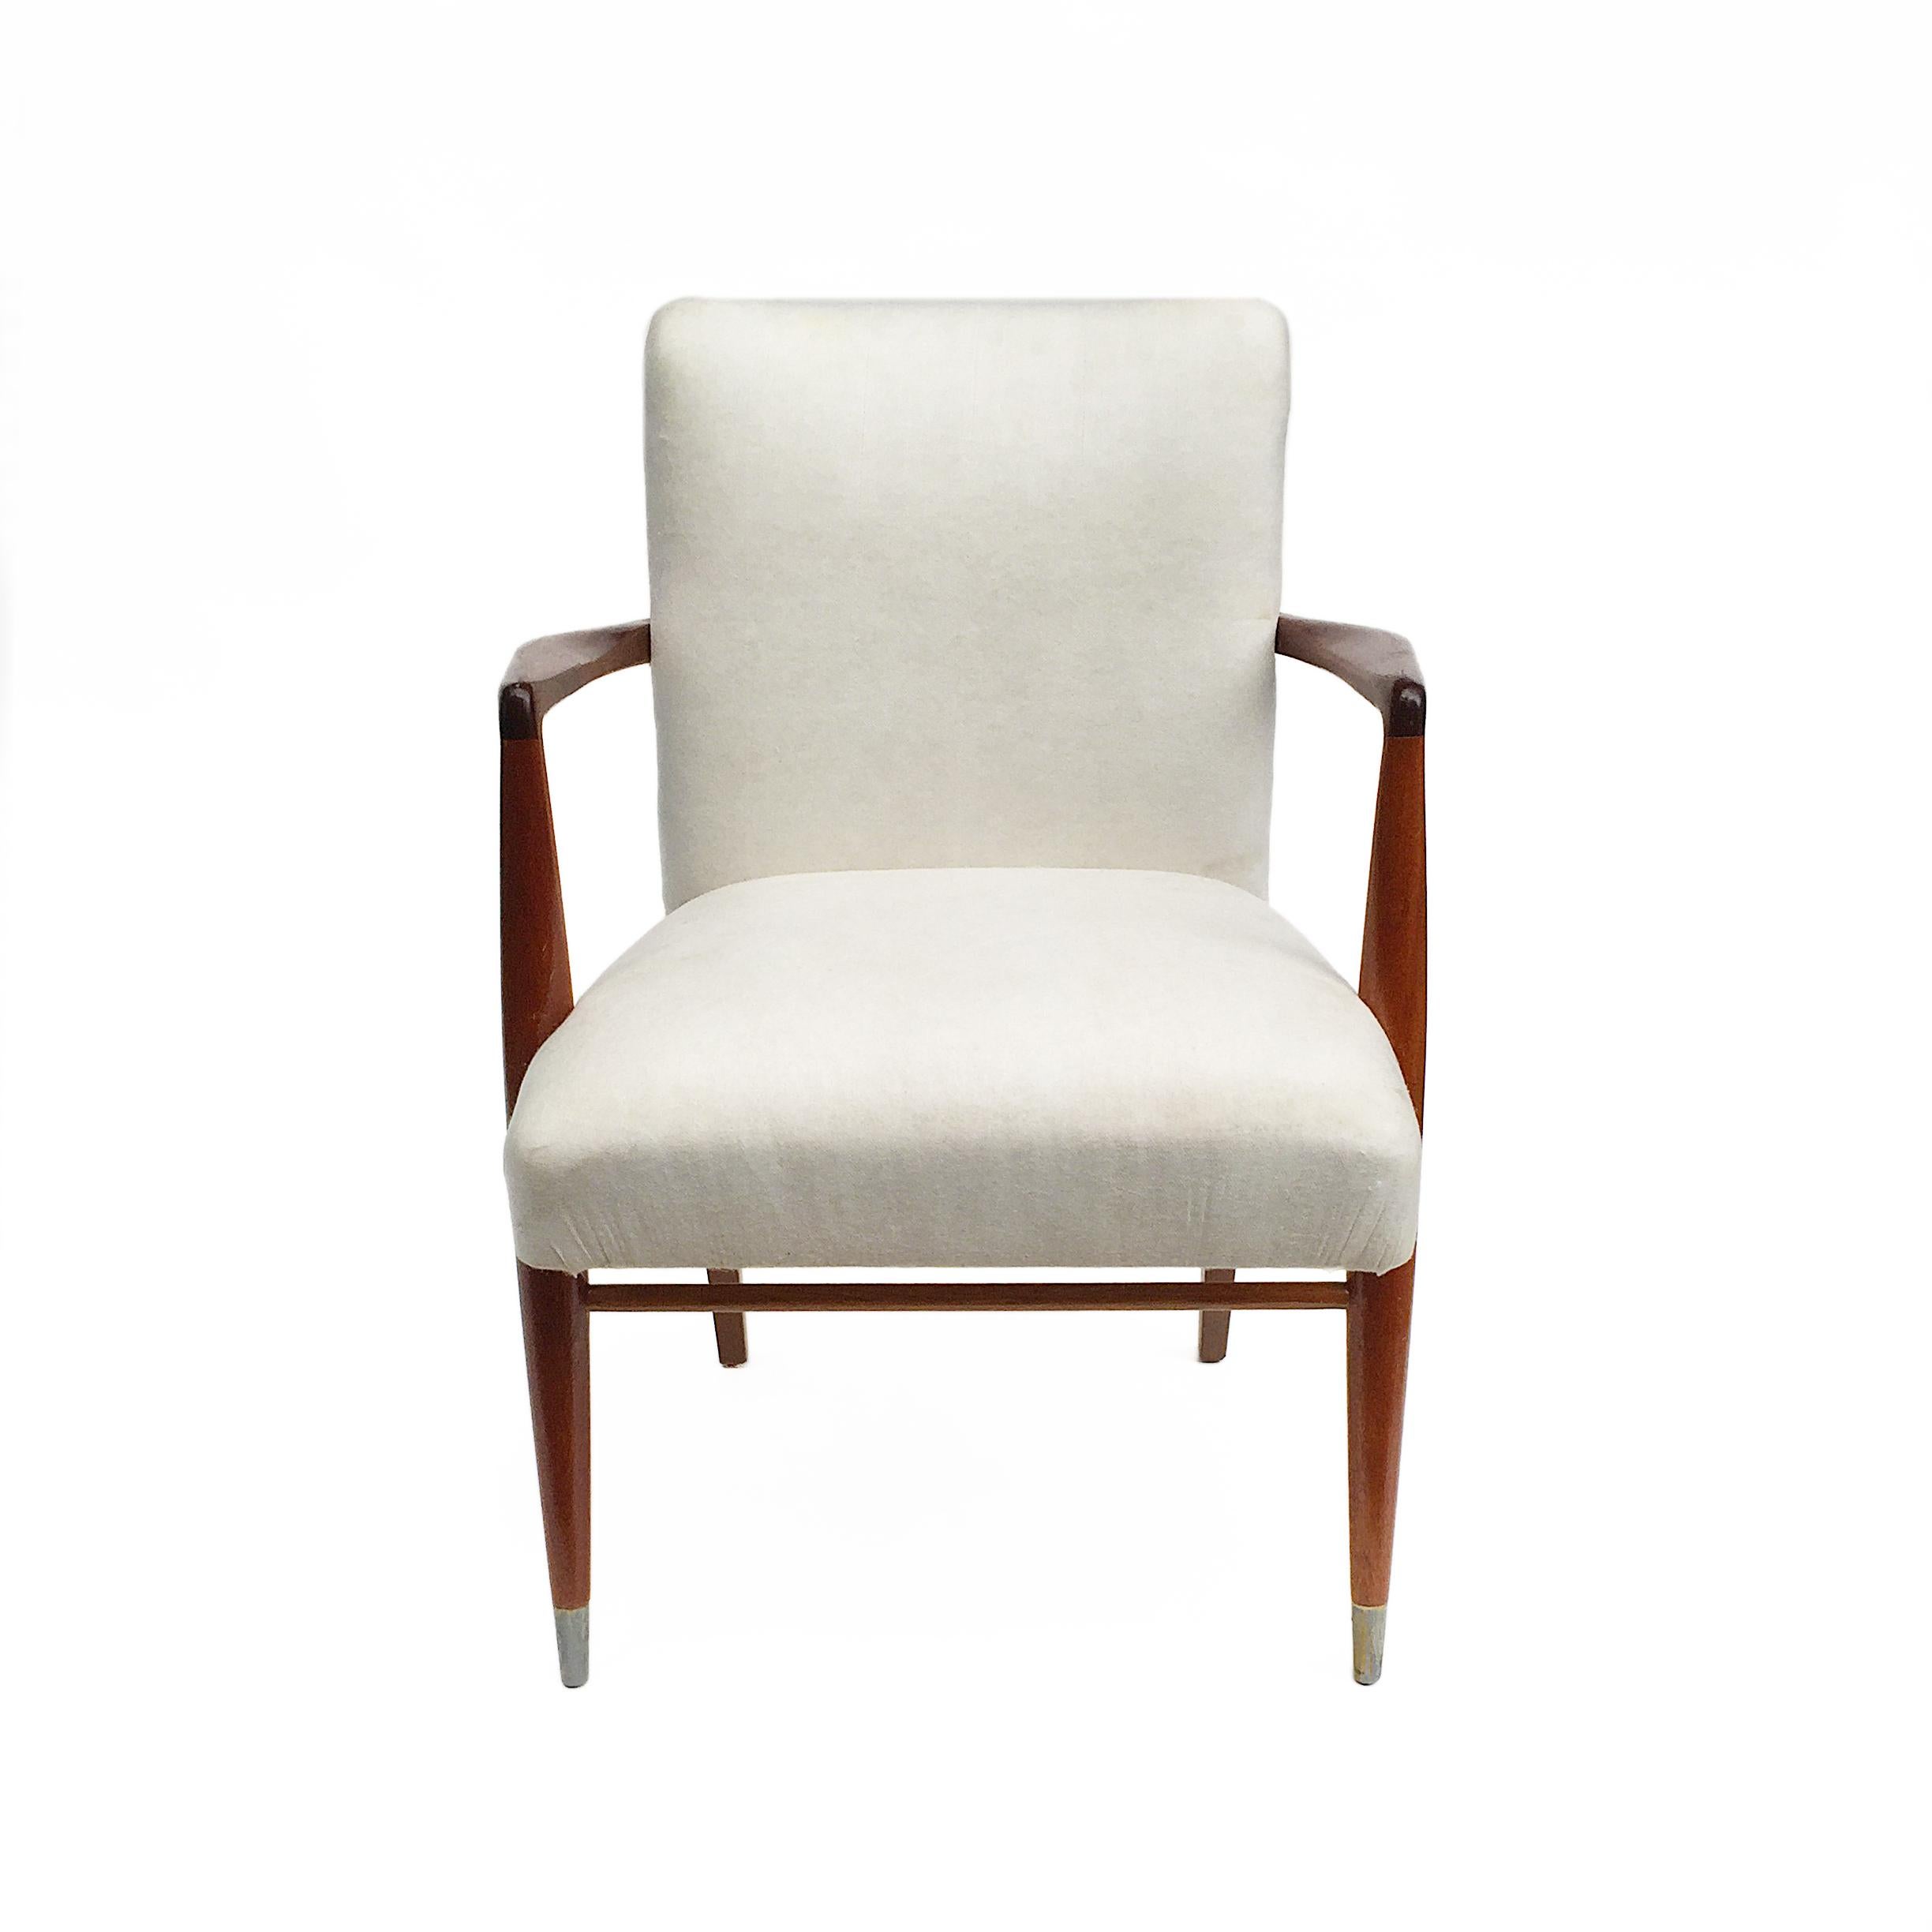 Three Classic Art Deco inspired Mid-Century Modern armchairs in rosewood frame and metal caps on the front feet. The armchairs have been restored and they are ready for upholstery with the final fabric of your choice, currently covered with lining